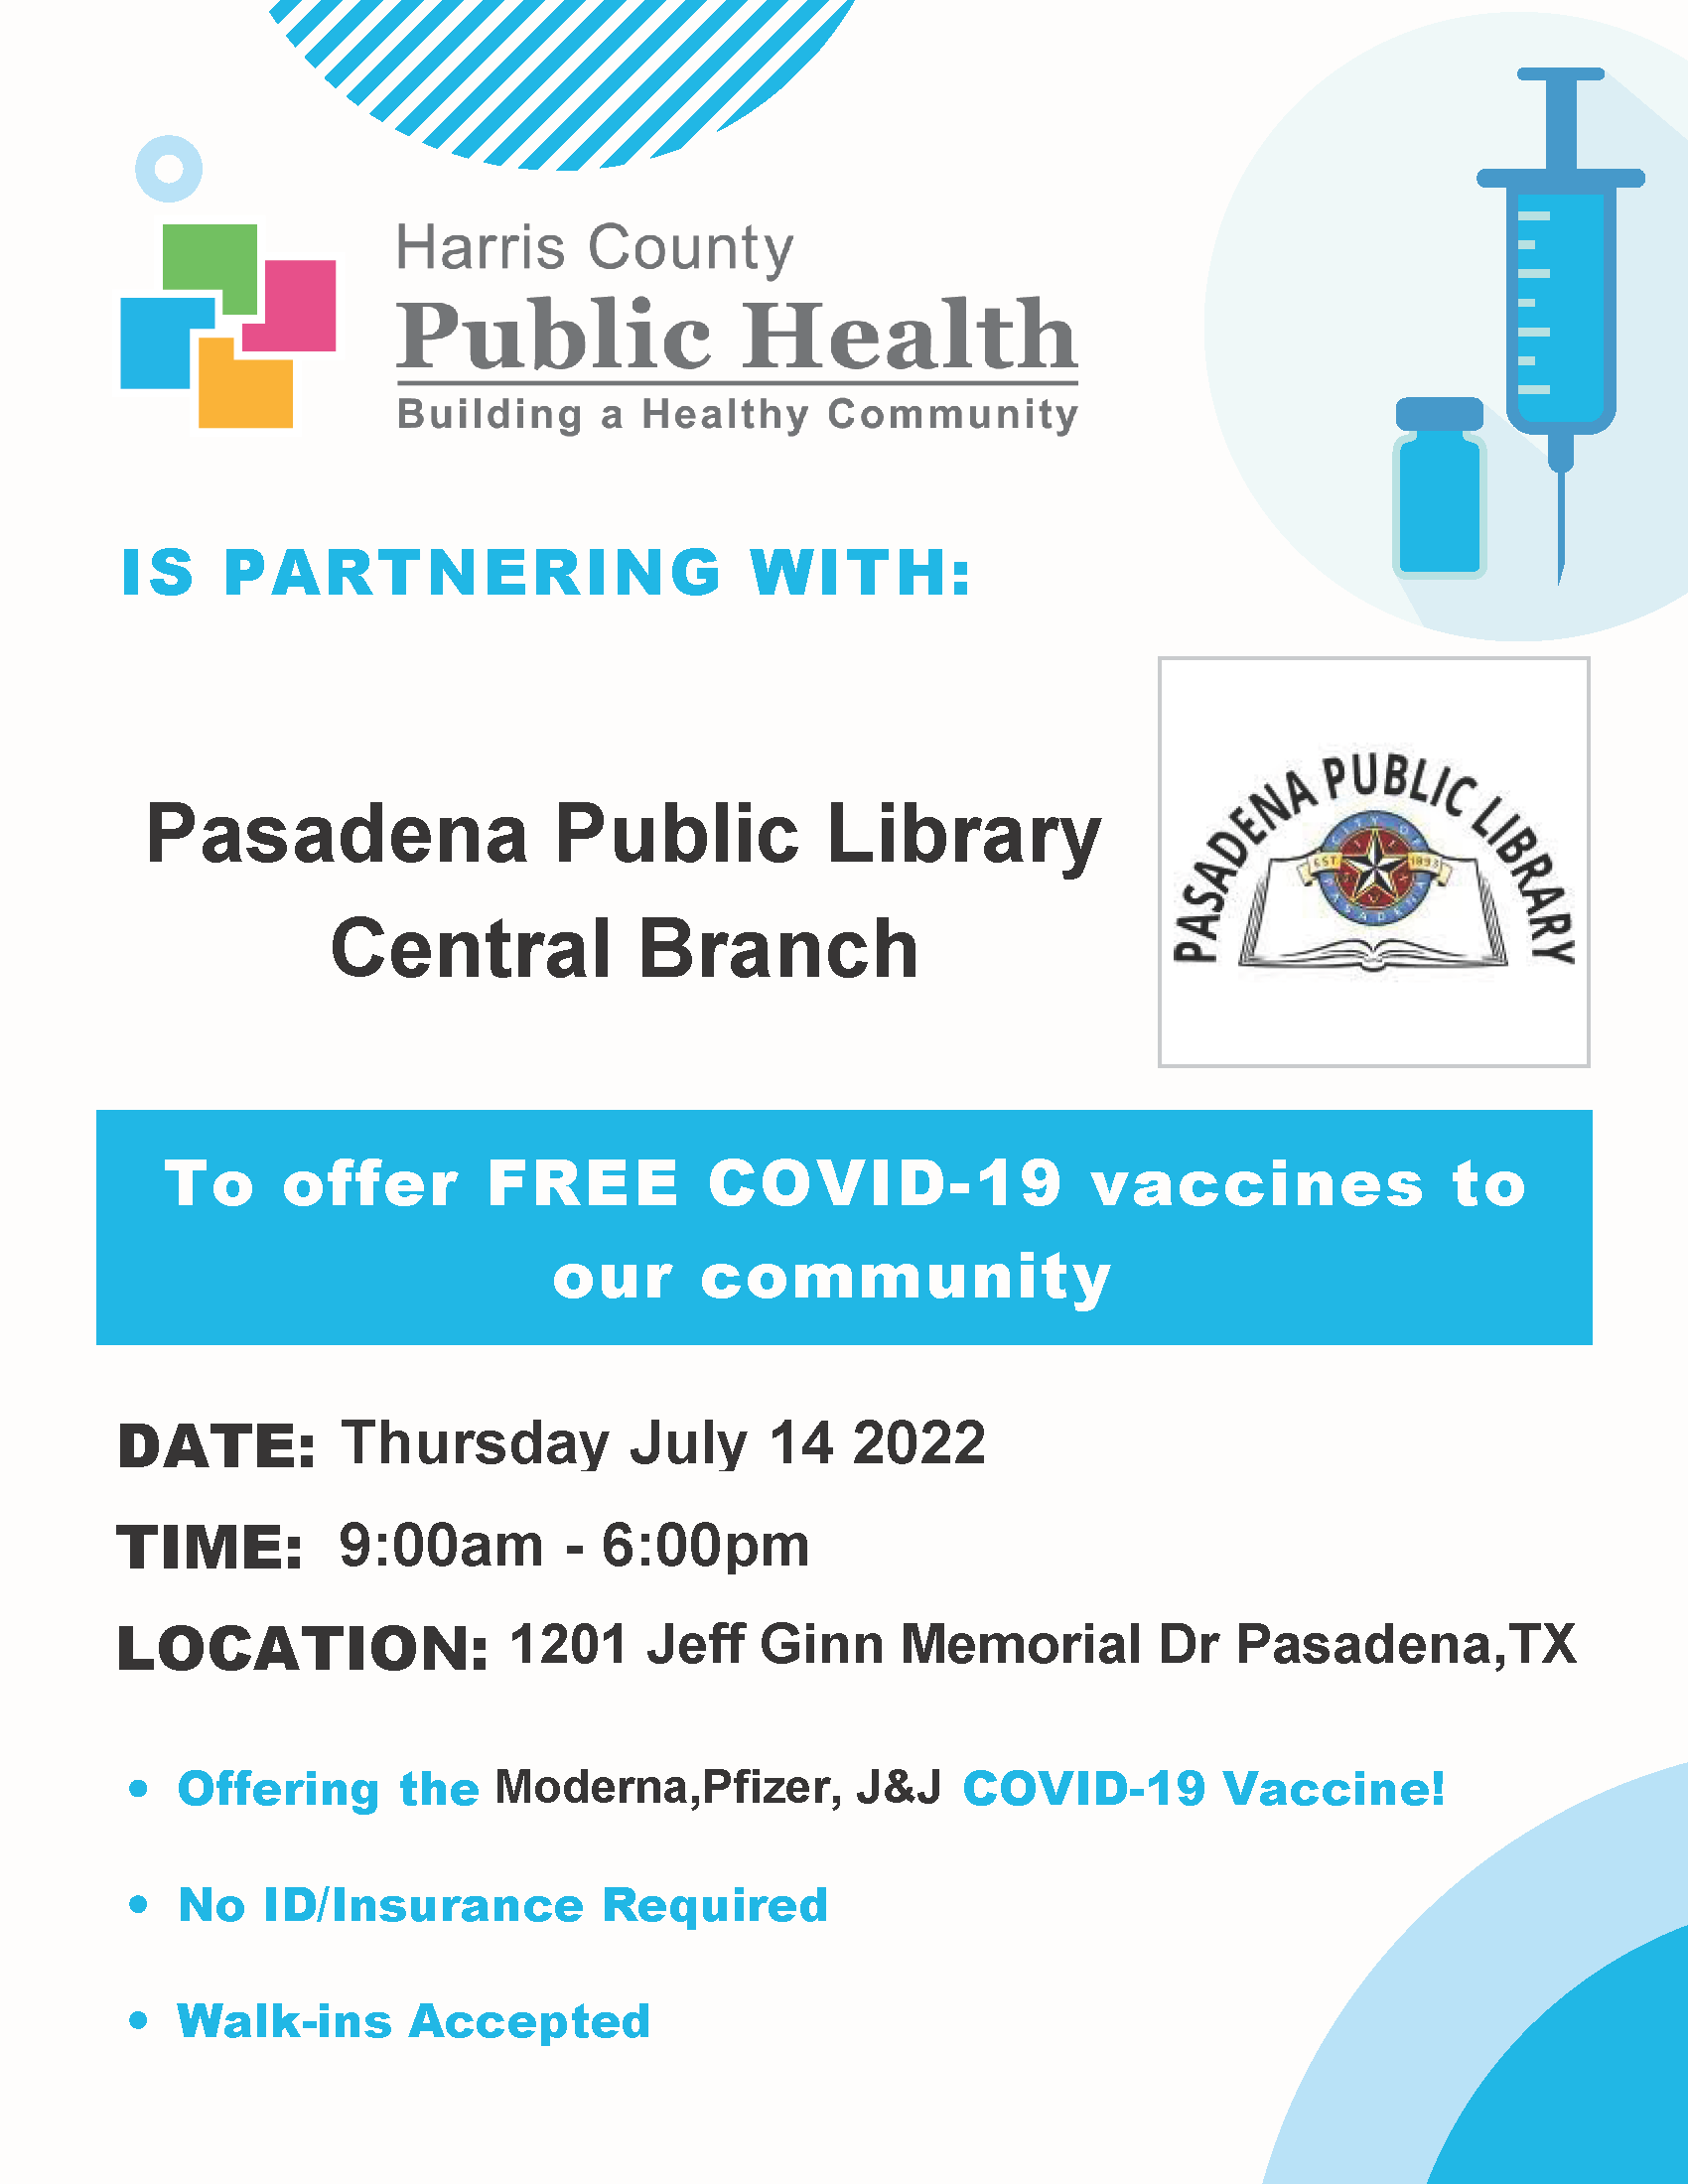 Harris County Public Health is partnering with the Pasadena Public Library to offer FREE COVID-19 vaccines on Thursday, July 14 from 9:00 AM to 6:00 PM in the Central Library Meeting Room at 1201 Jeff Ginn